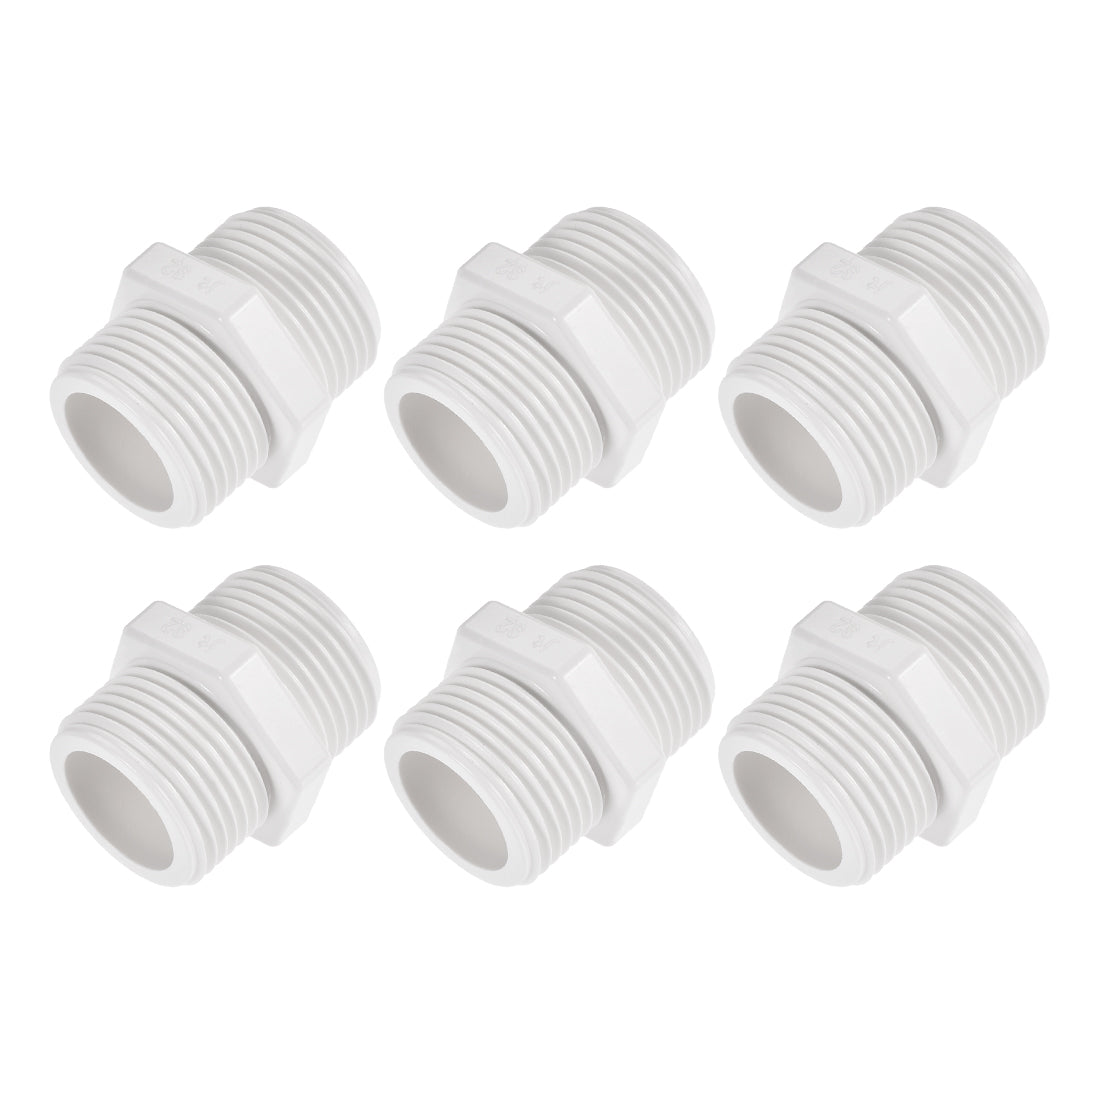 Uxcell Uxcell Pipe Fitting, G1 Male Thread, Hex Nipple Tube Adaptor Hose Connector, for Water Tanks, PVC, White, Pack of 6